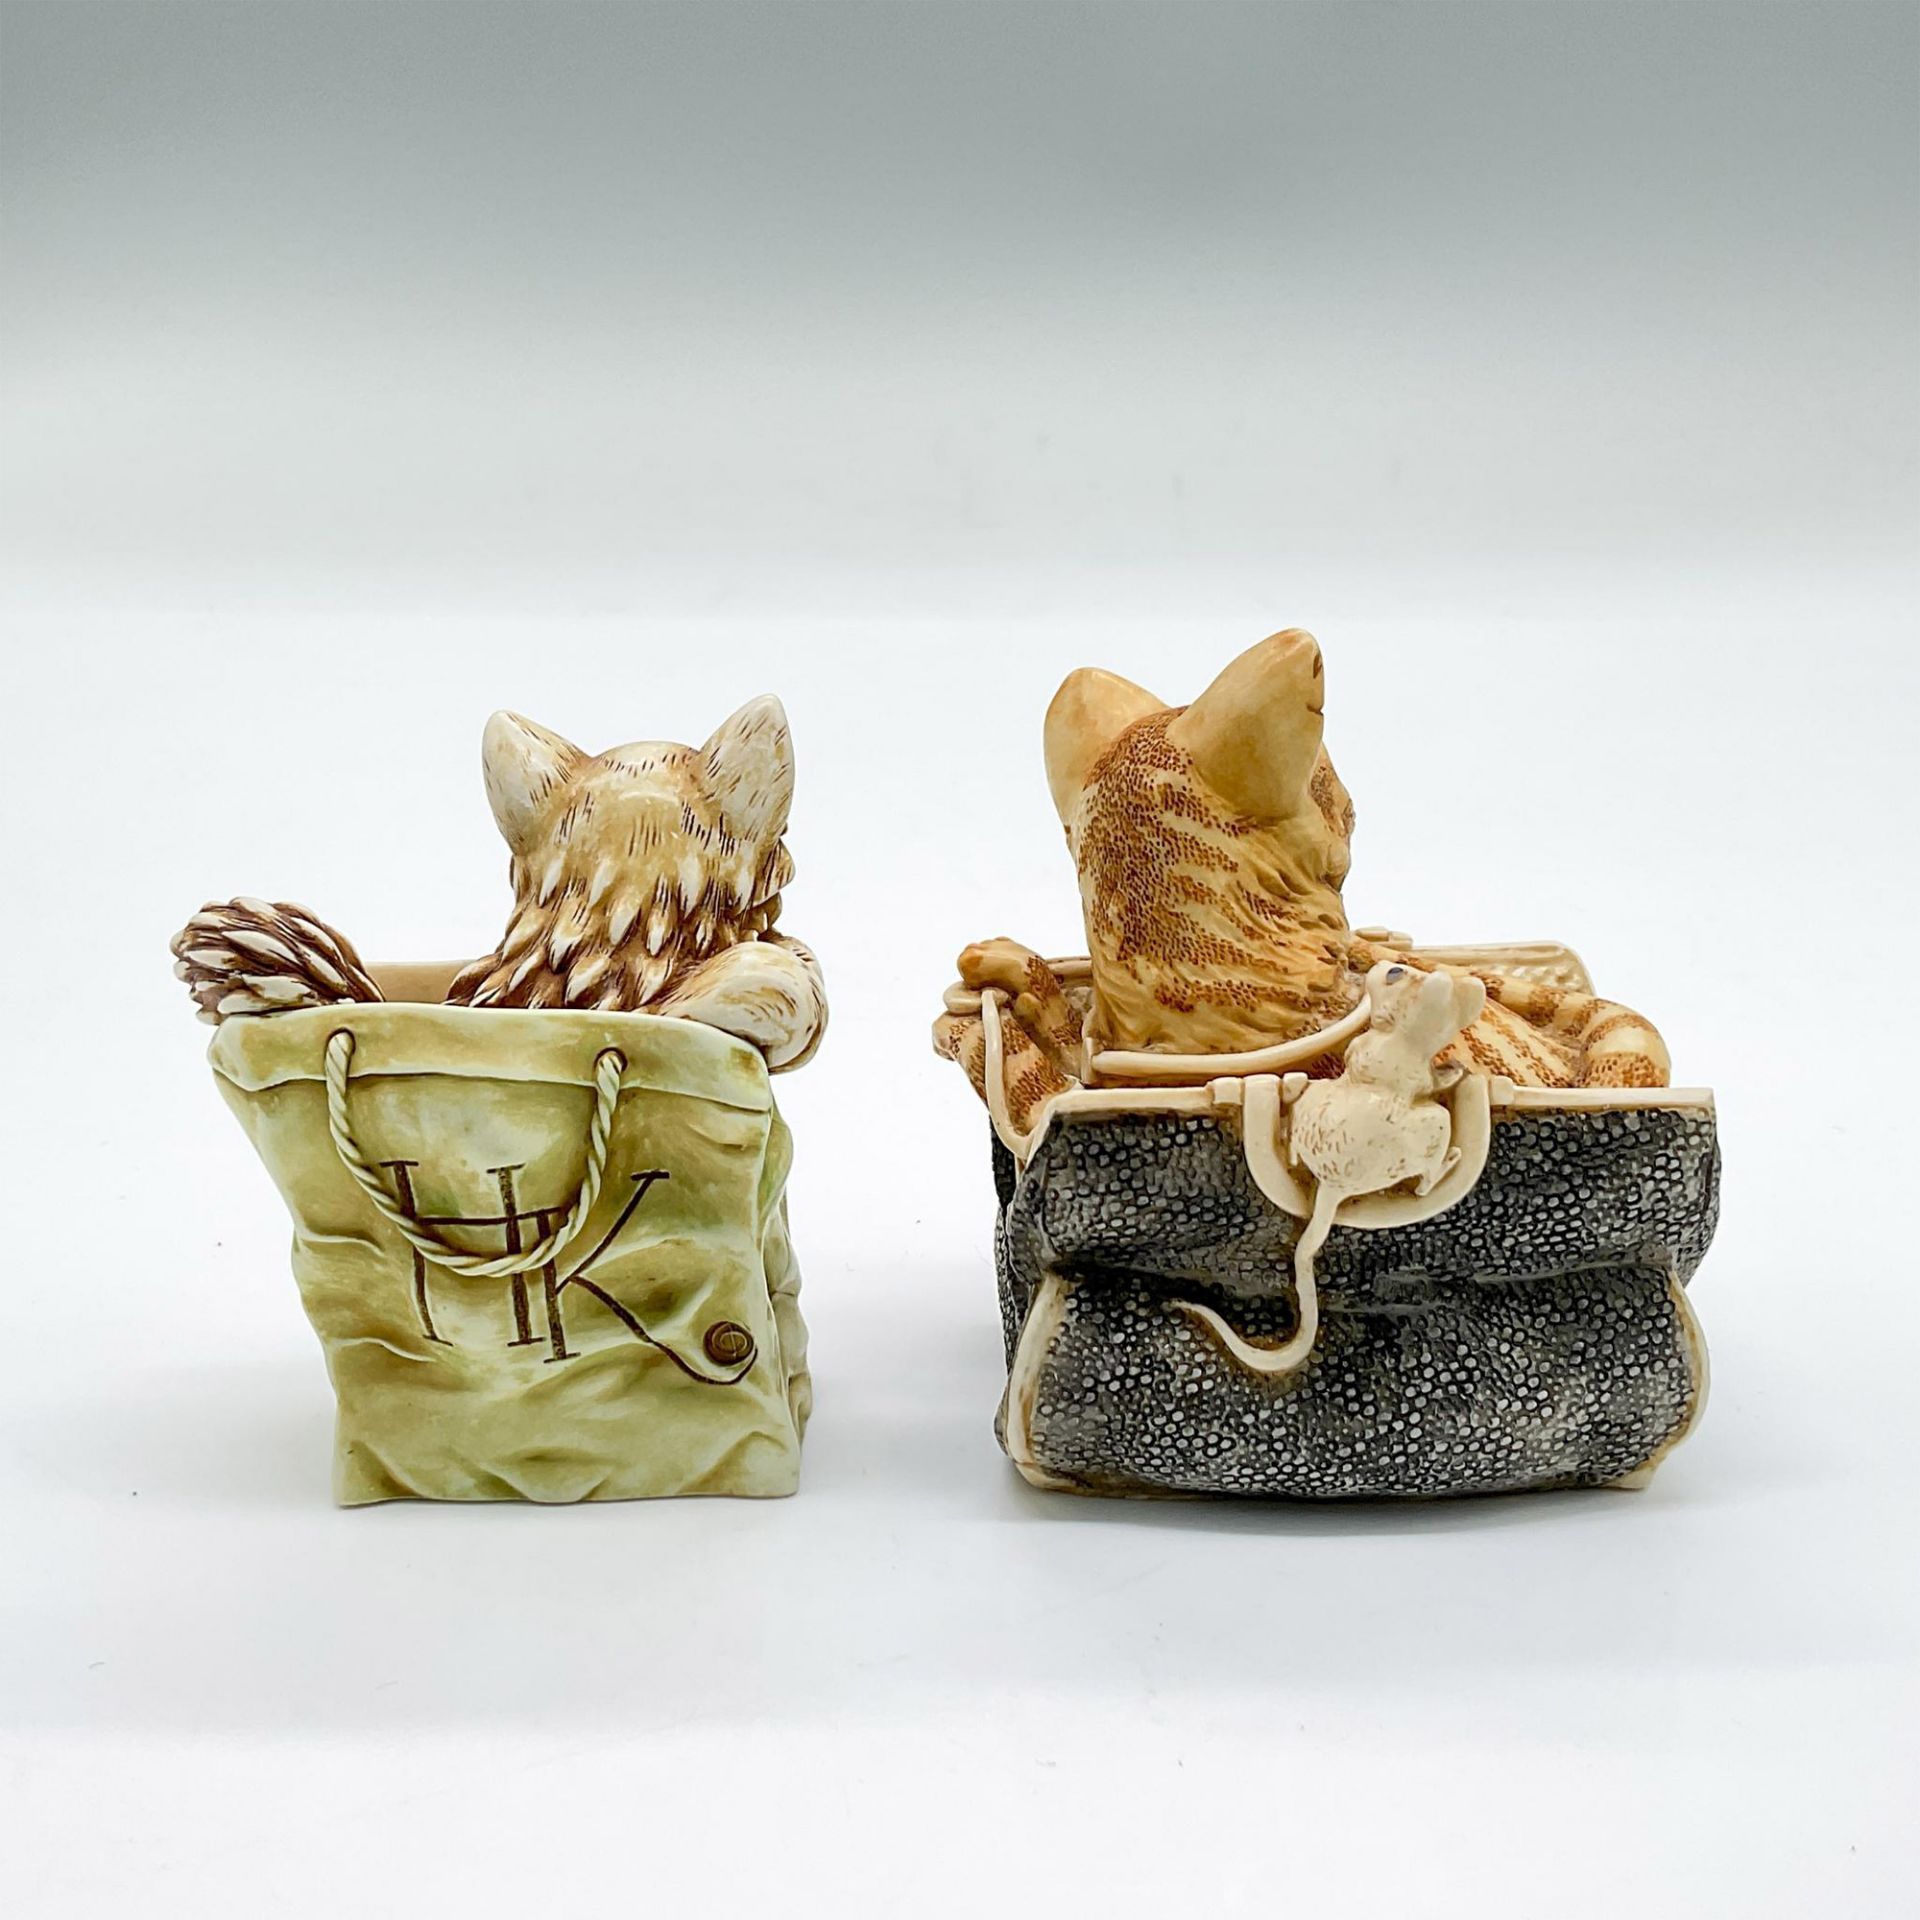 2pc Harmony Kingdom Treasure Boxes, Cats in Bags - Image 3 of 5